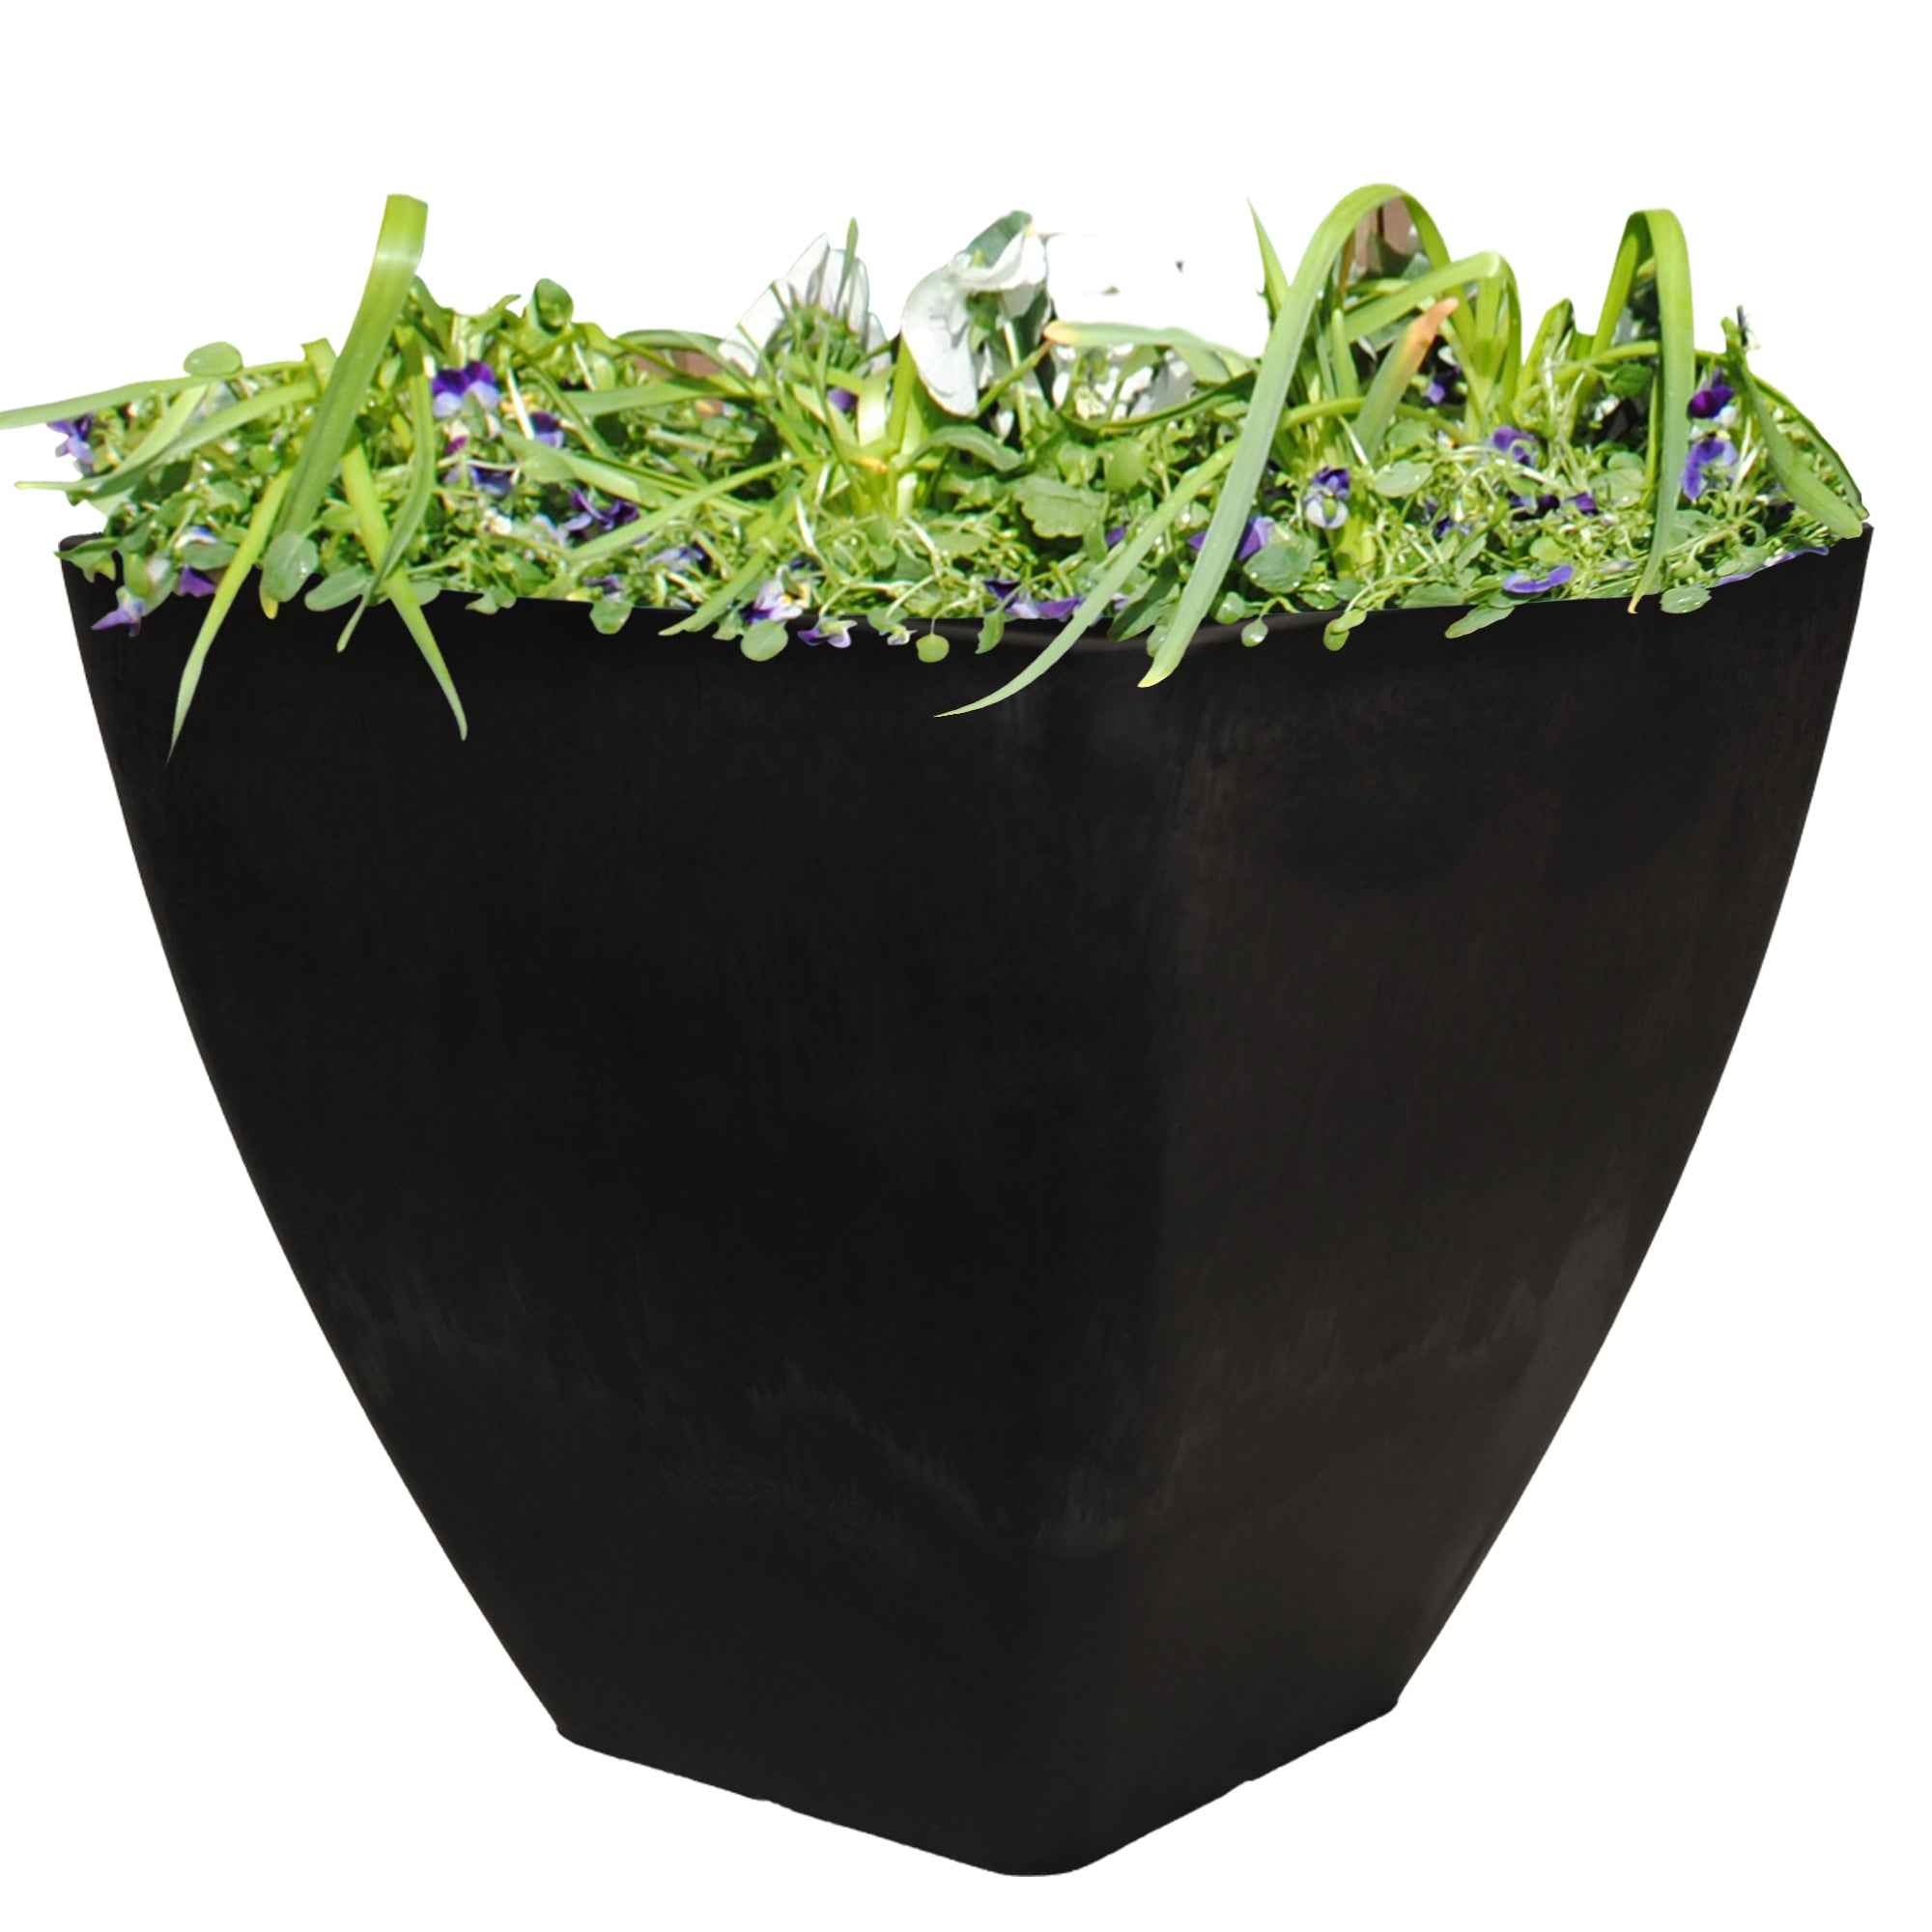 12 inch planter in graphite with flowers on a white background